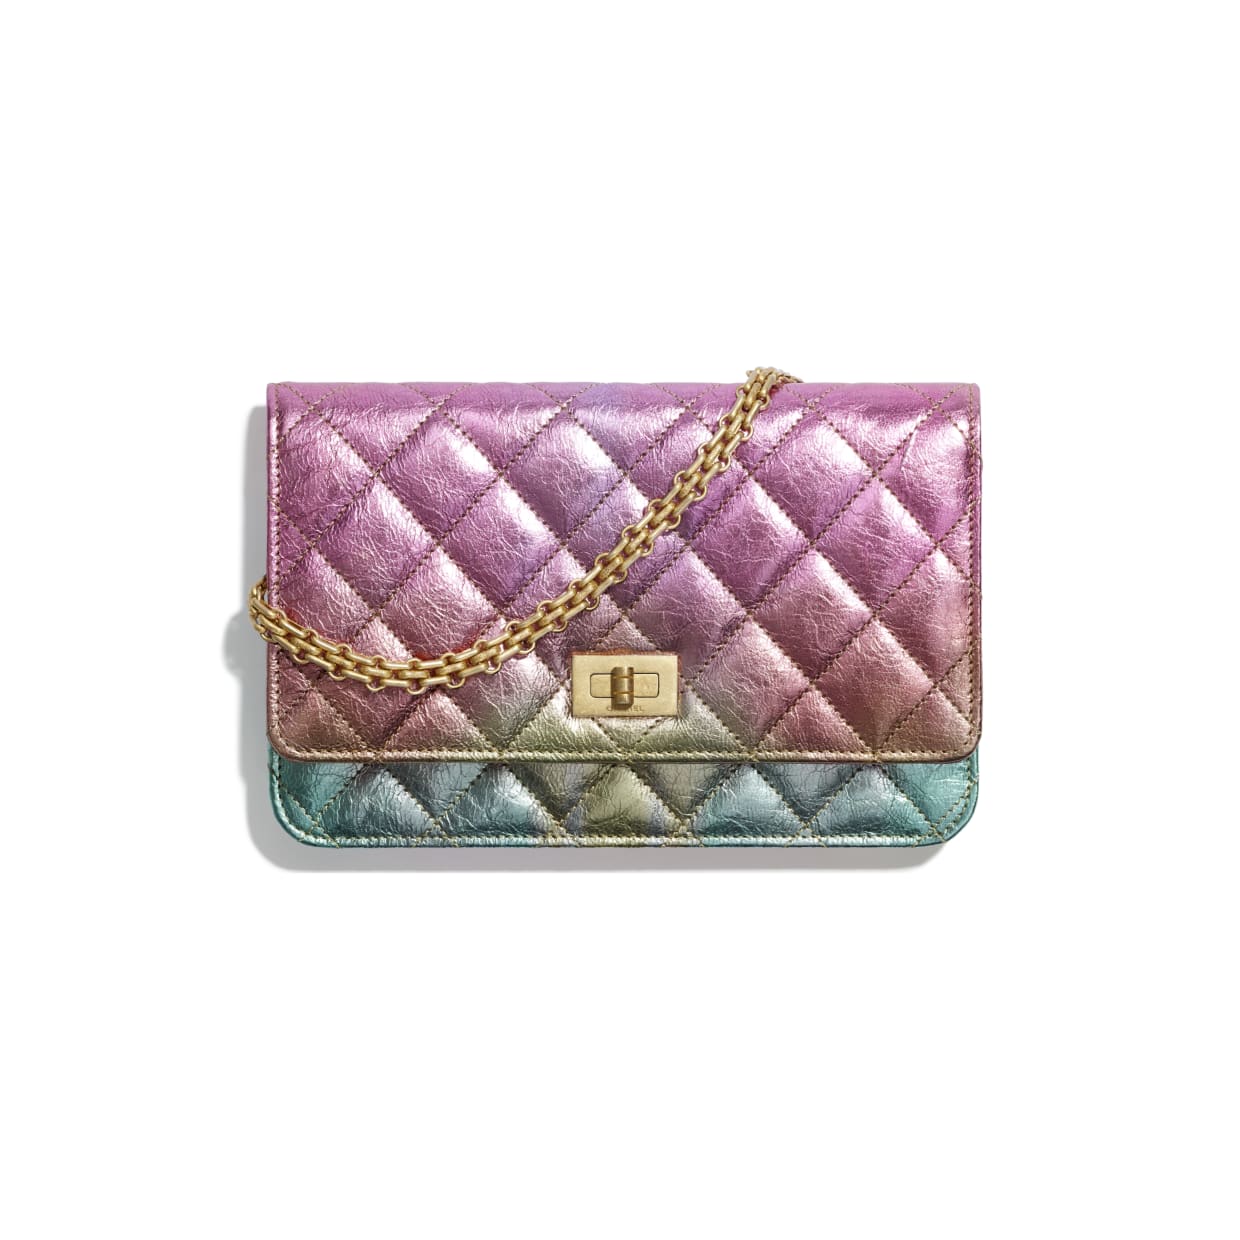 Small leather goods of the 2021/22 Métiers d'art CHANEL Fashion